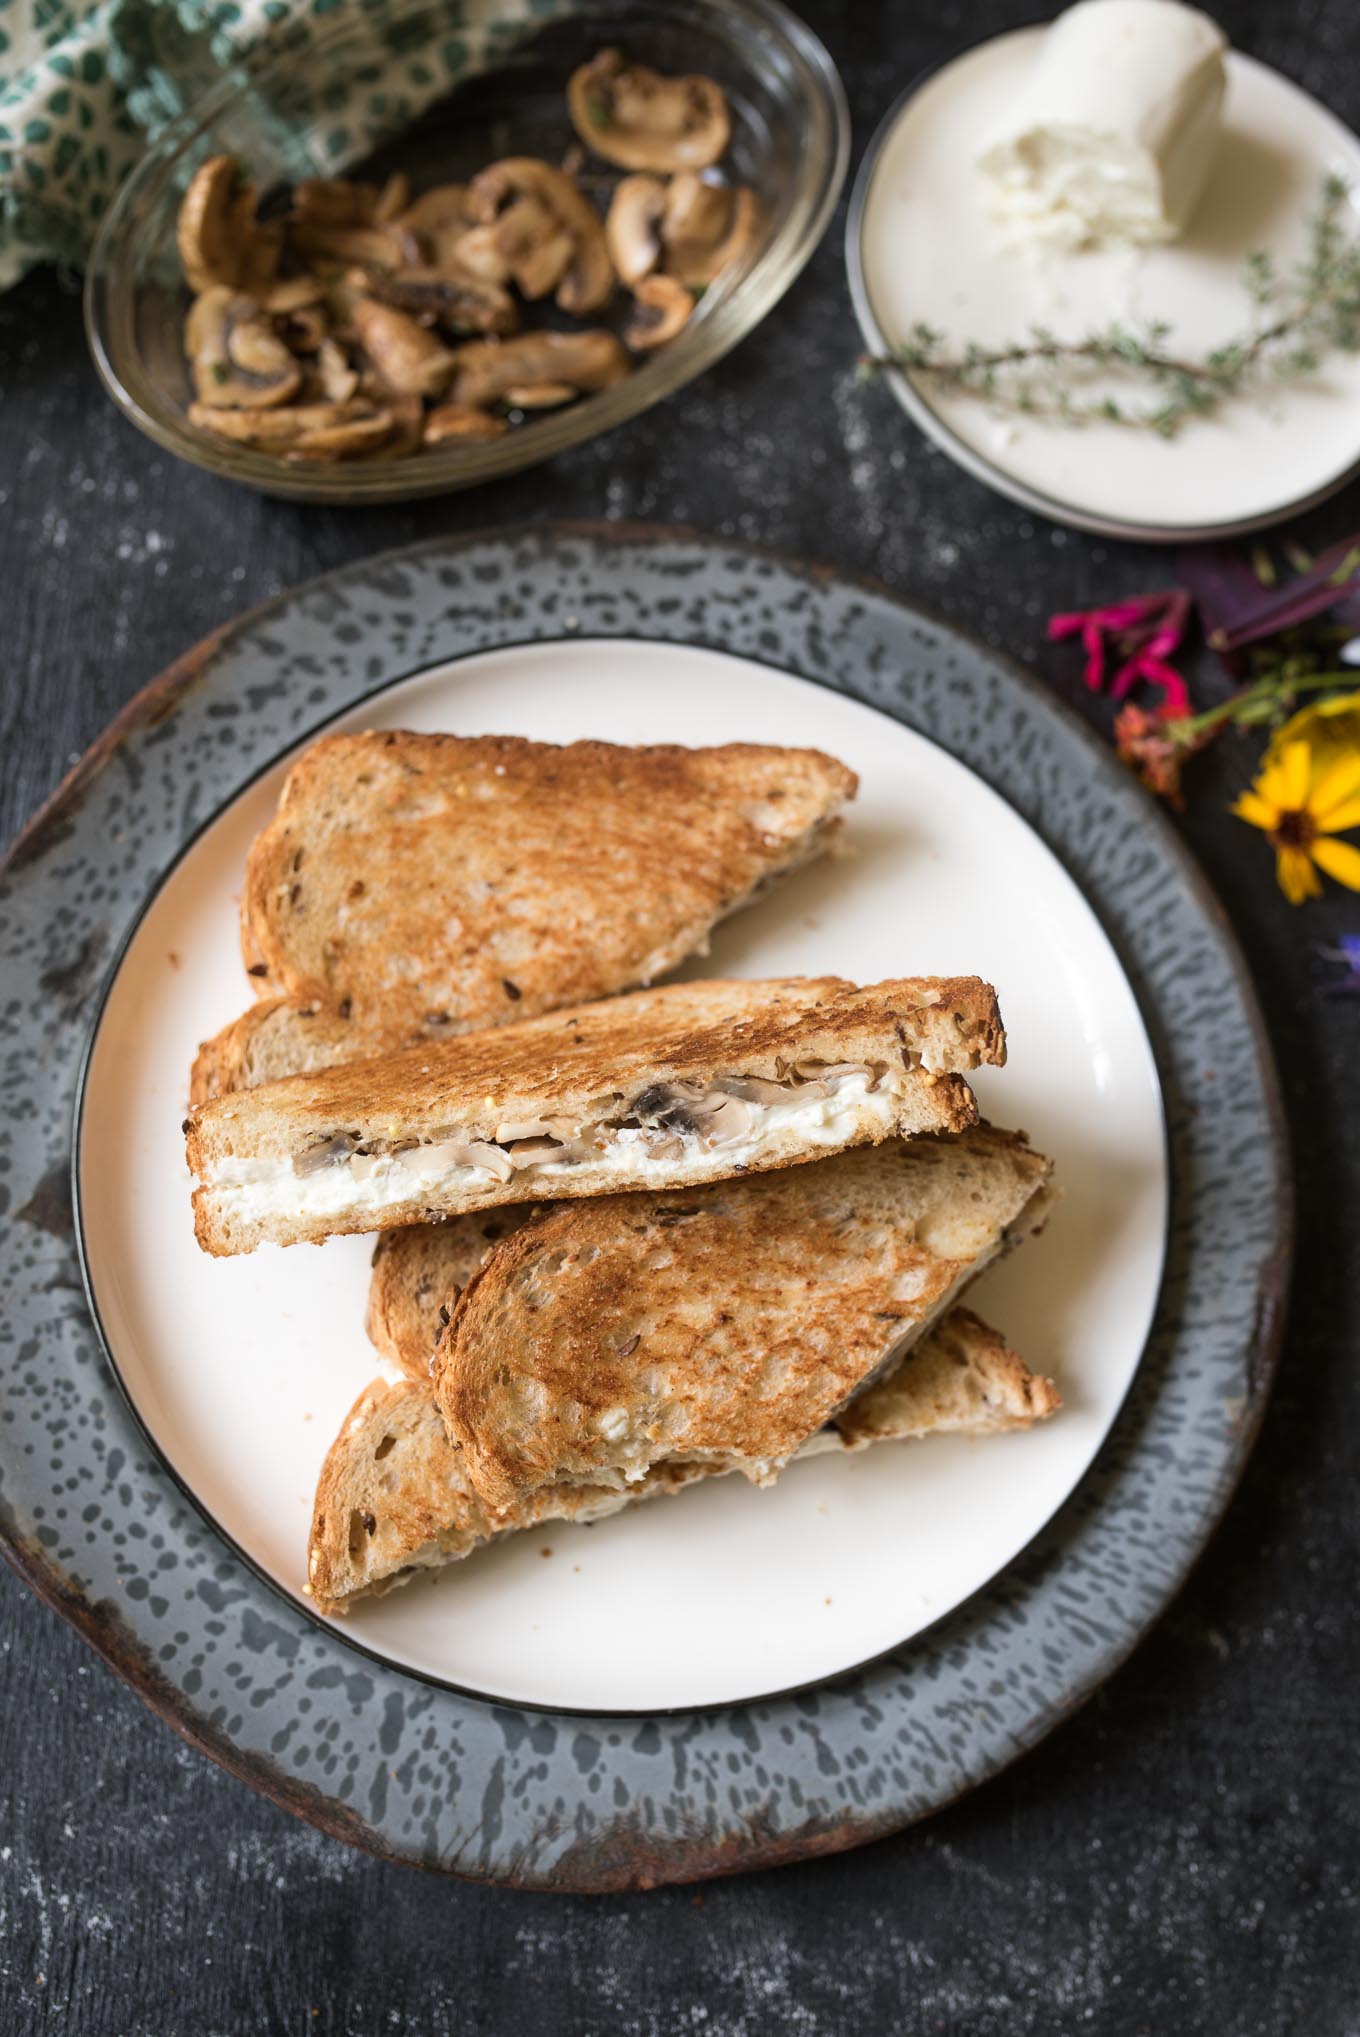 Grilled Goat Cheese Sandwiches with Mushrooms are simple yet gourmet, perfect for when you want grown-up flavors in a classic sandwich for any meal of the day.